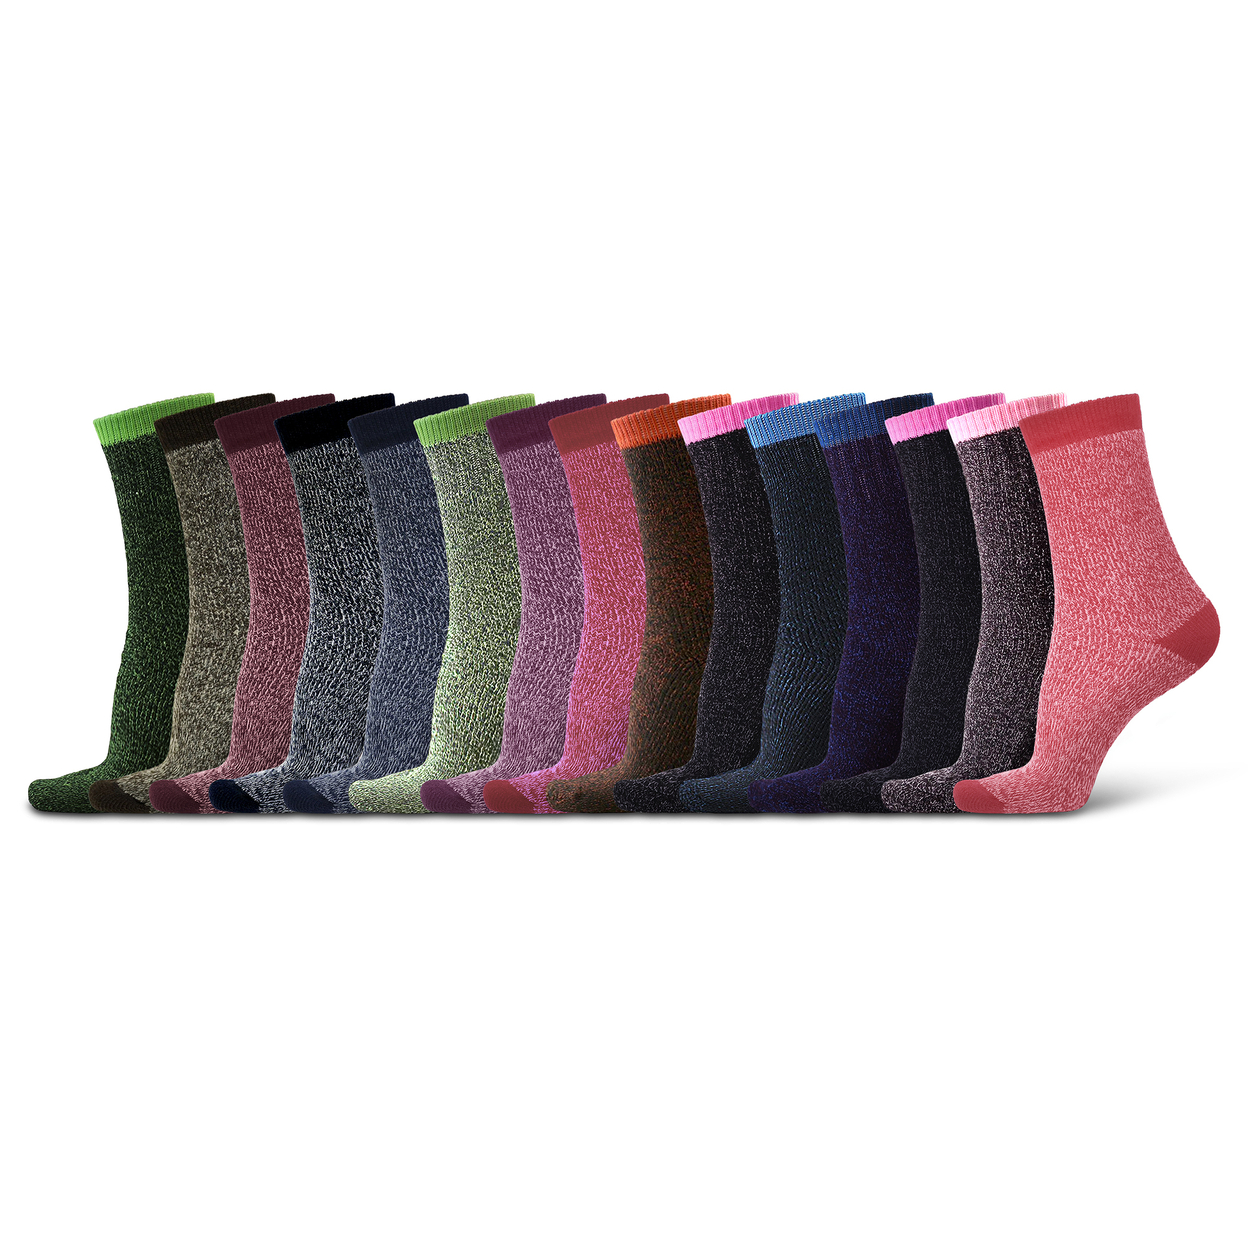 Multi-Pairs: Women's Cozy Soft Thick Winter Warm Thermal Insulated Heated Crew Socks - 5-pairs